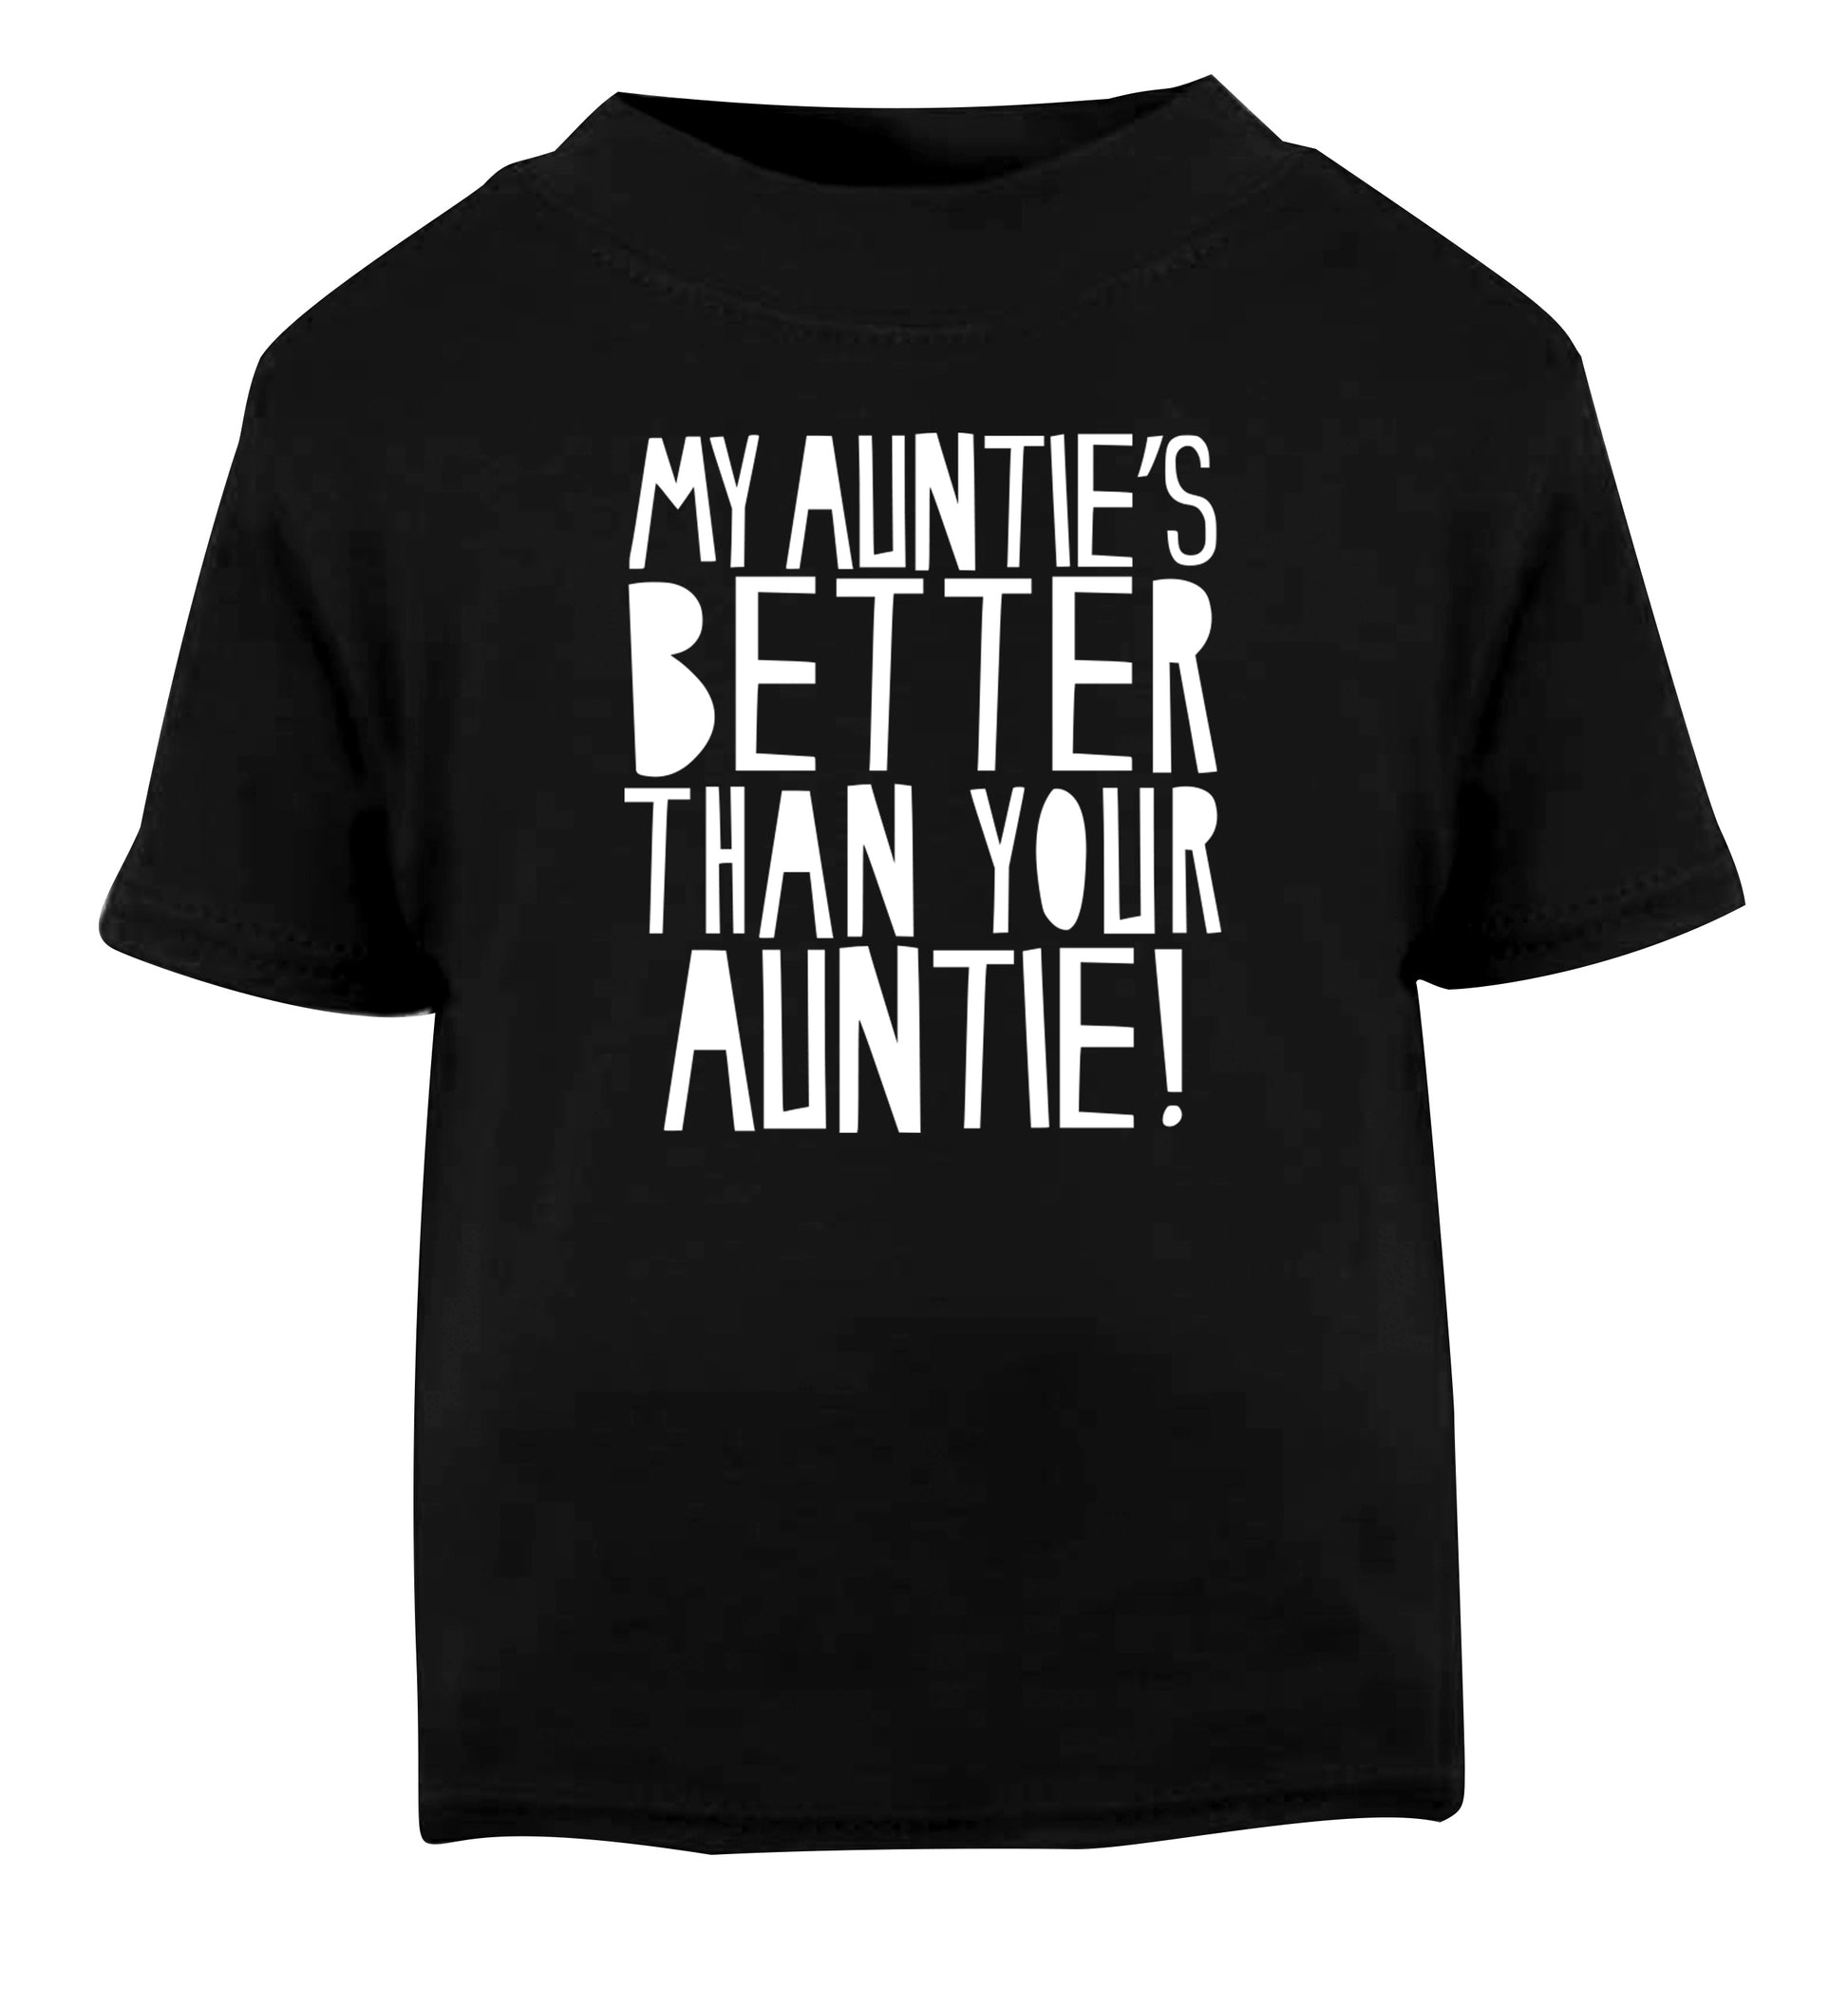 My auntie's better than your auntie Black Baby Toddler Tshirt 2 years